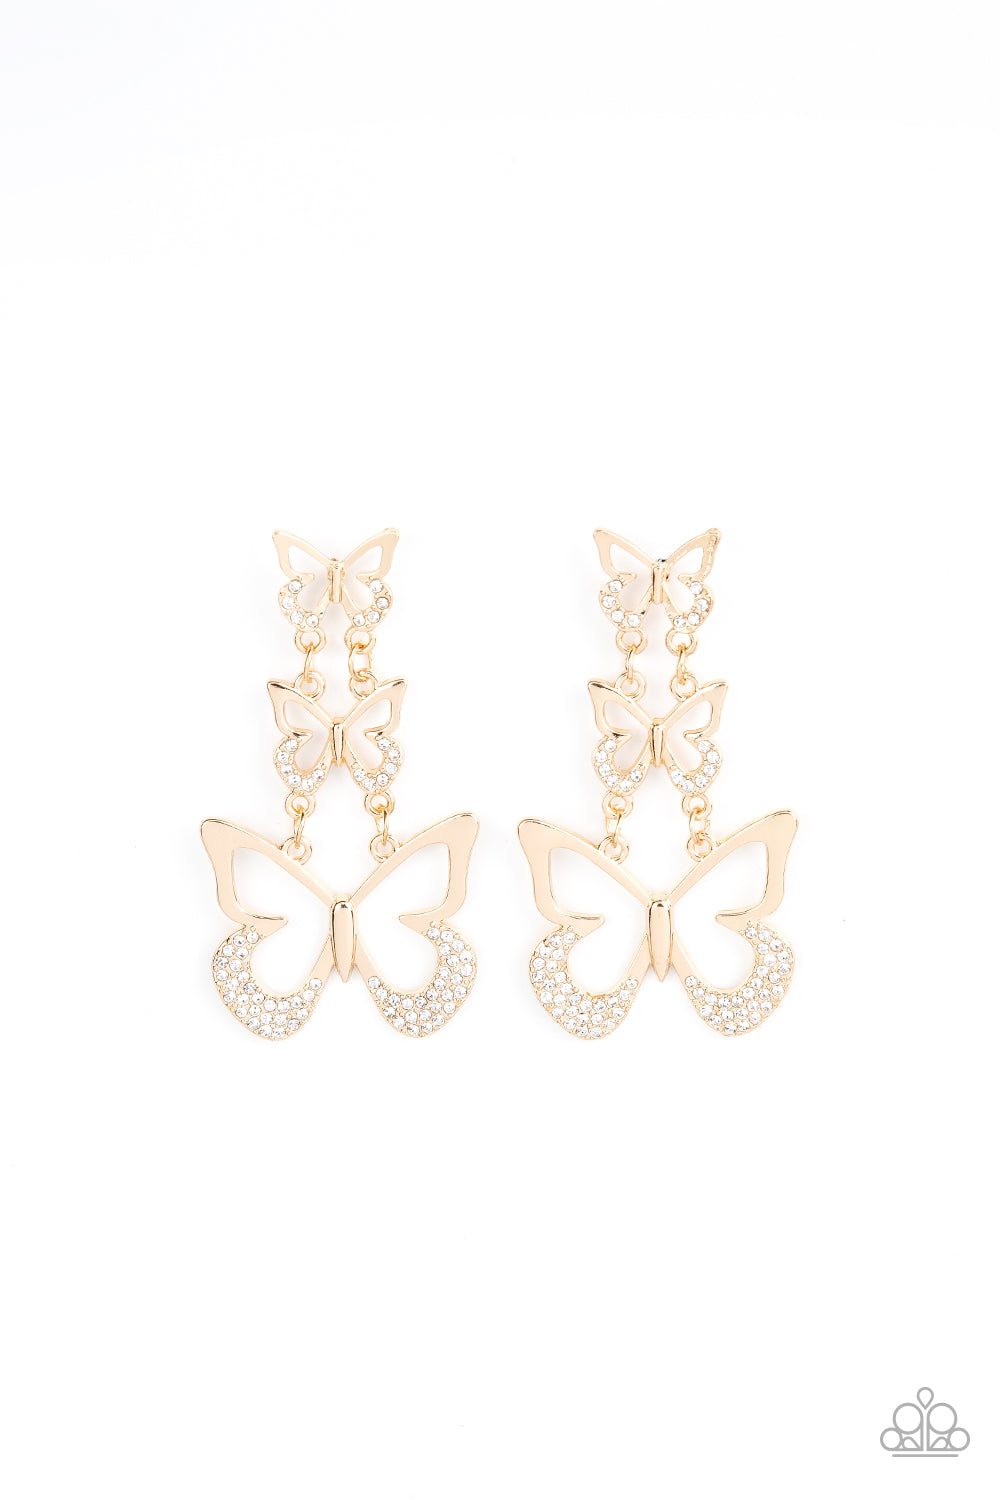 An airy trio of gold butterflies gradually increase in size as they link into a whimsical lure. The bottom of each butterfly has been dipped in white rhinestones, adding a glitzy finish to the fluttering centerpiece. Earring attaches to a standard post fitting.